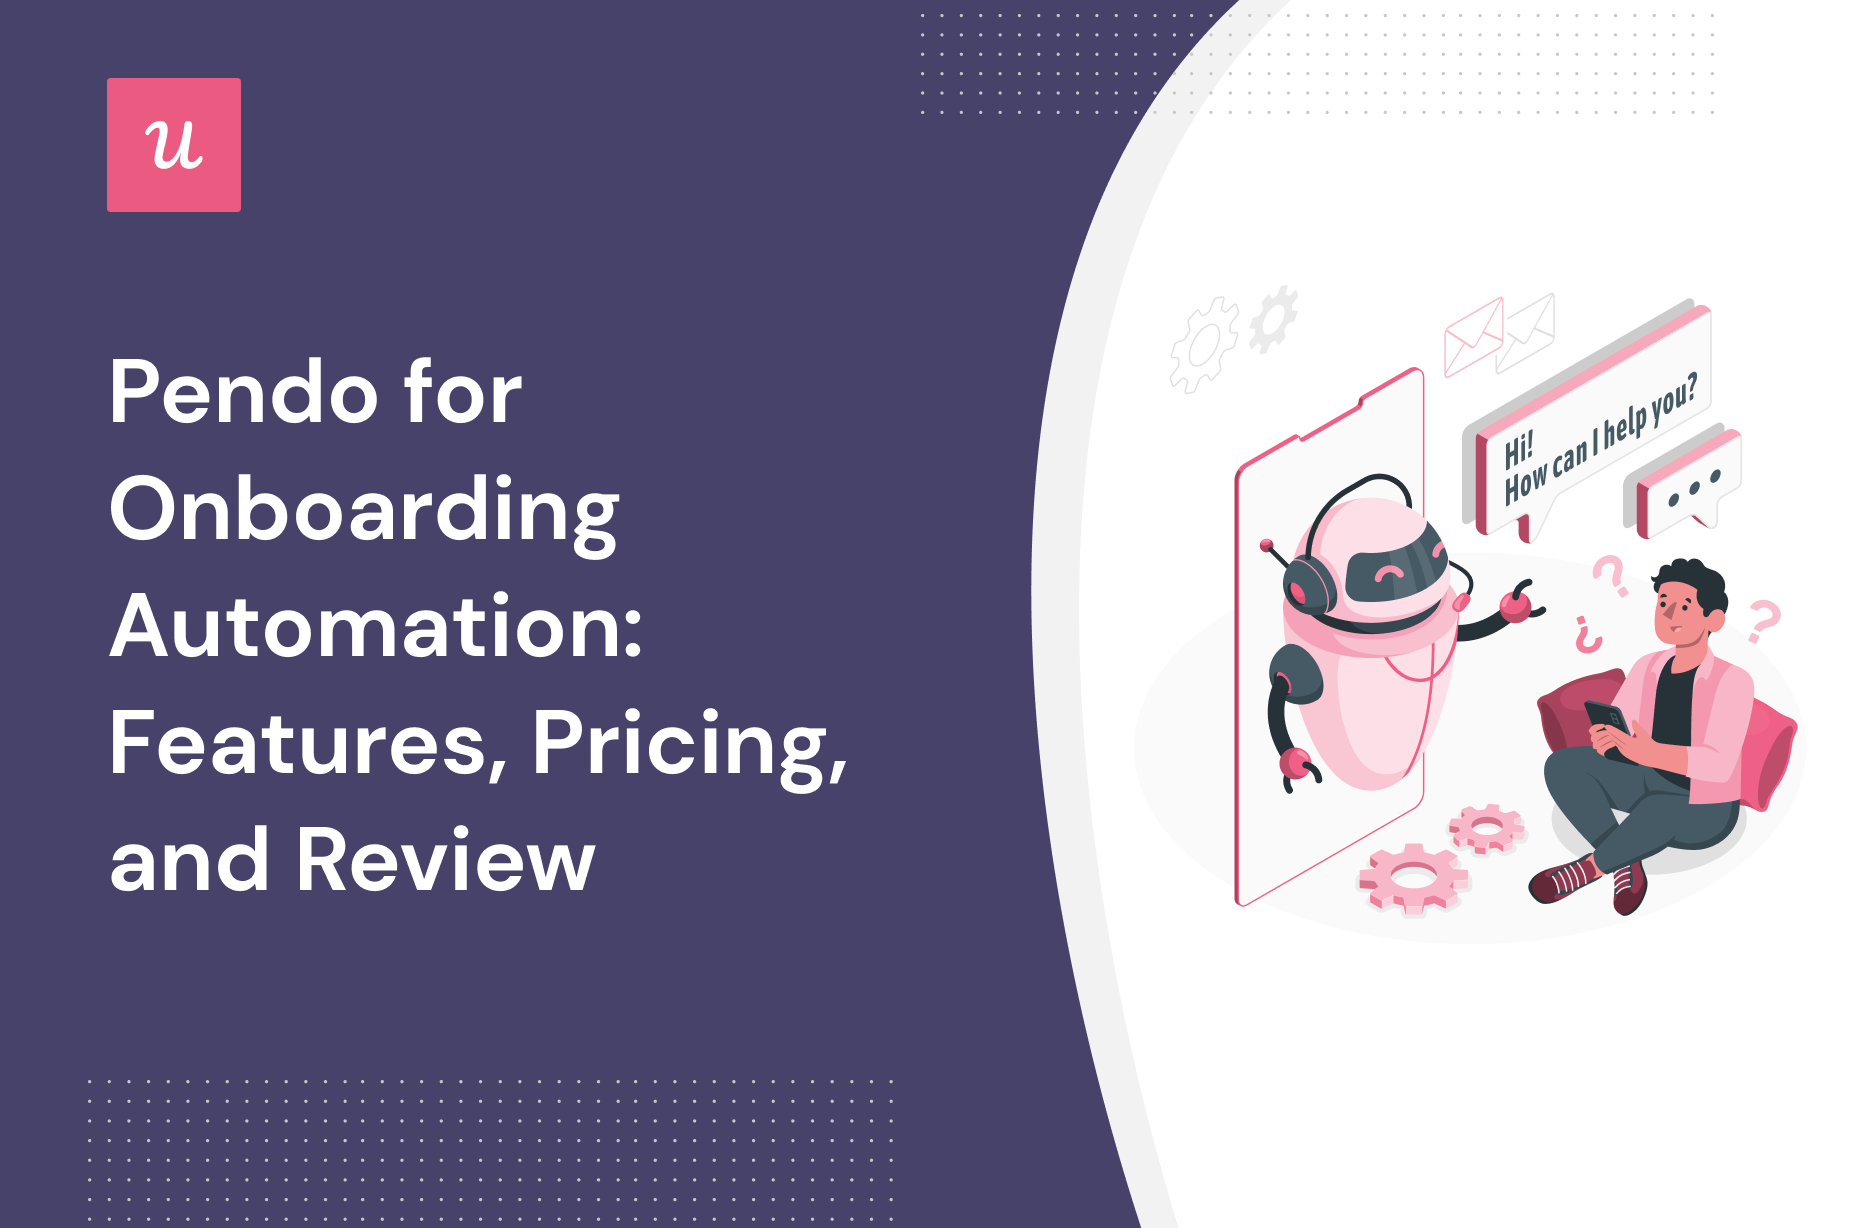 Pendo for Onboarding Automation: Features, Pricing, and Review